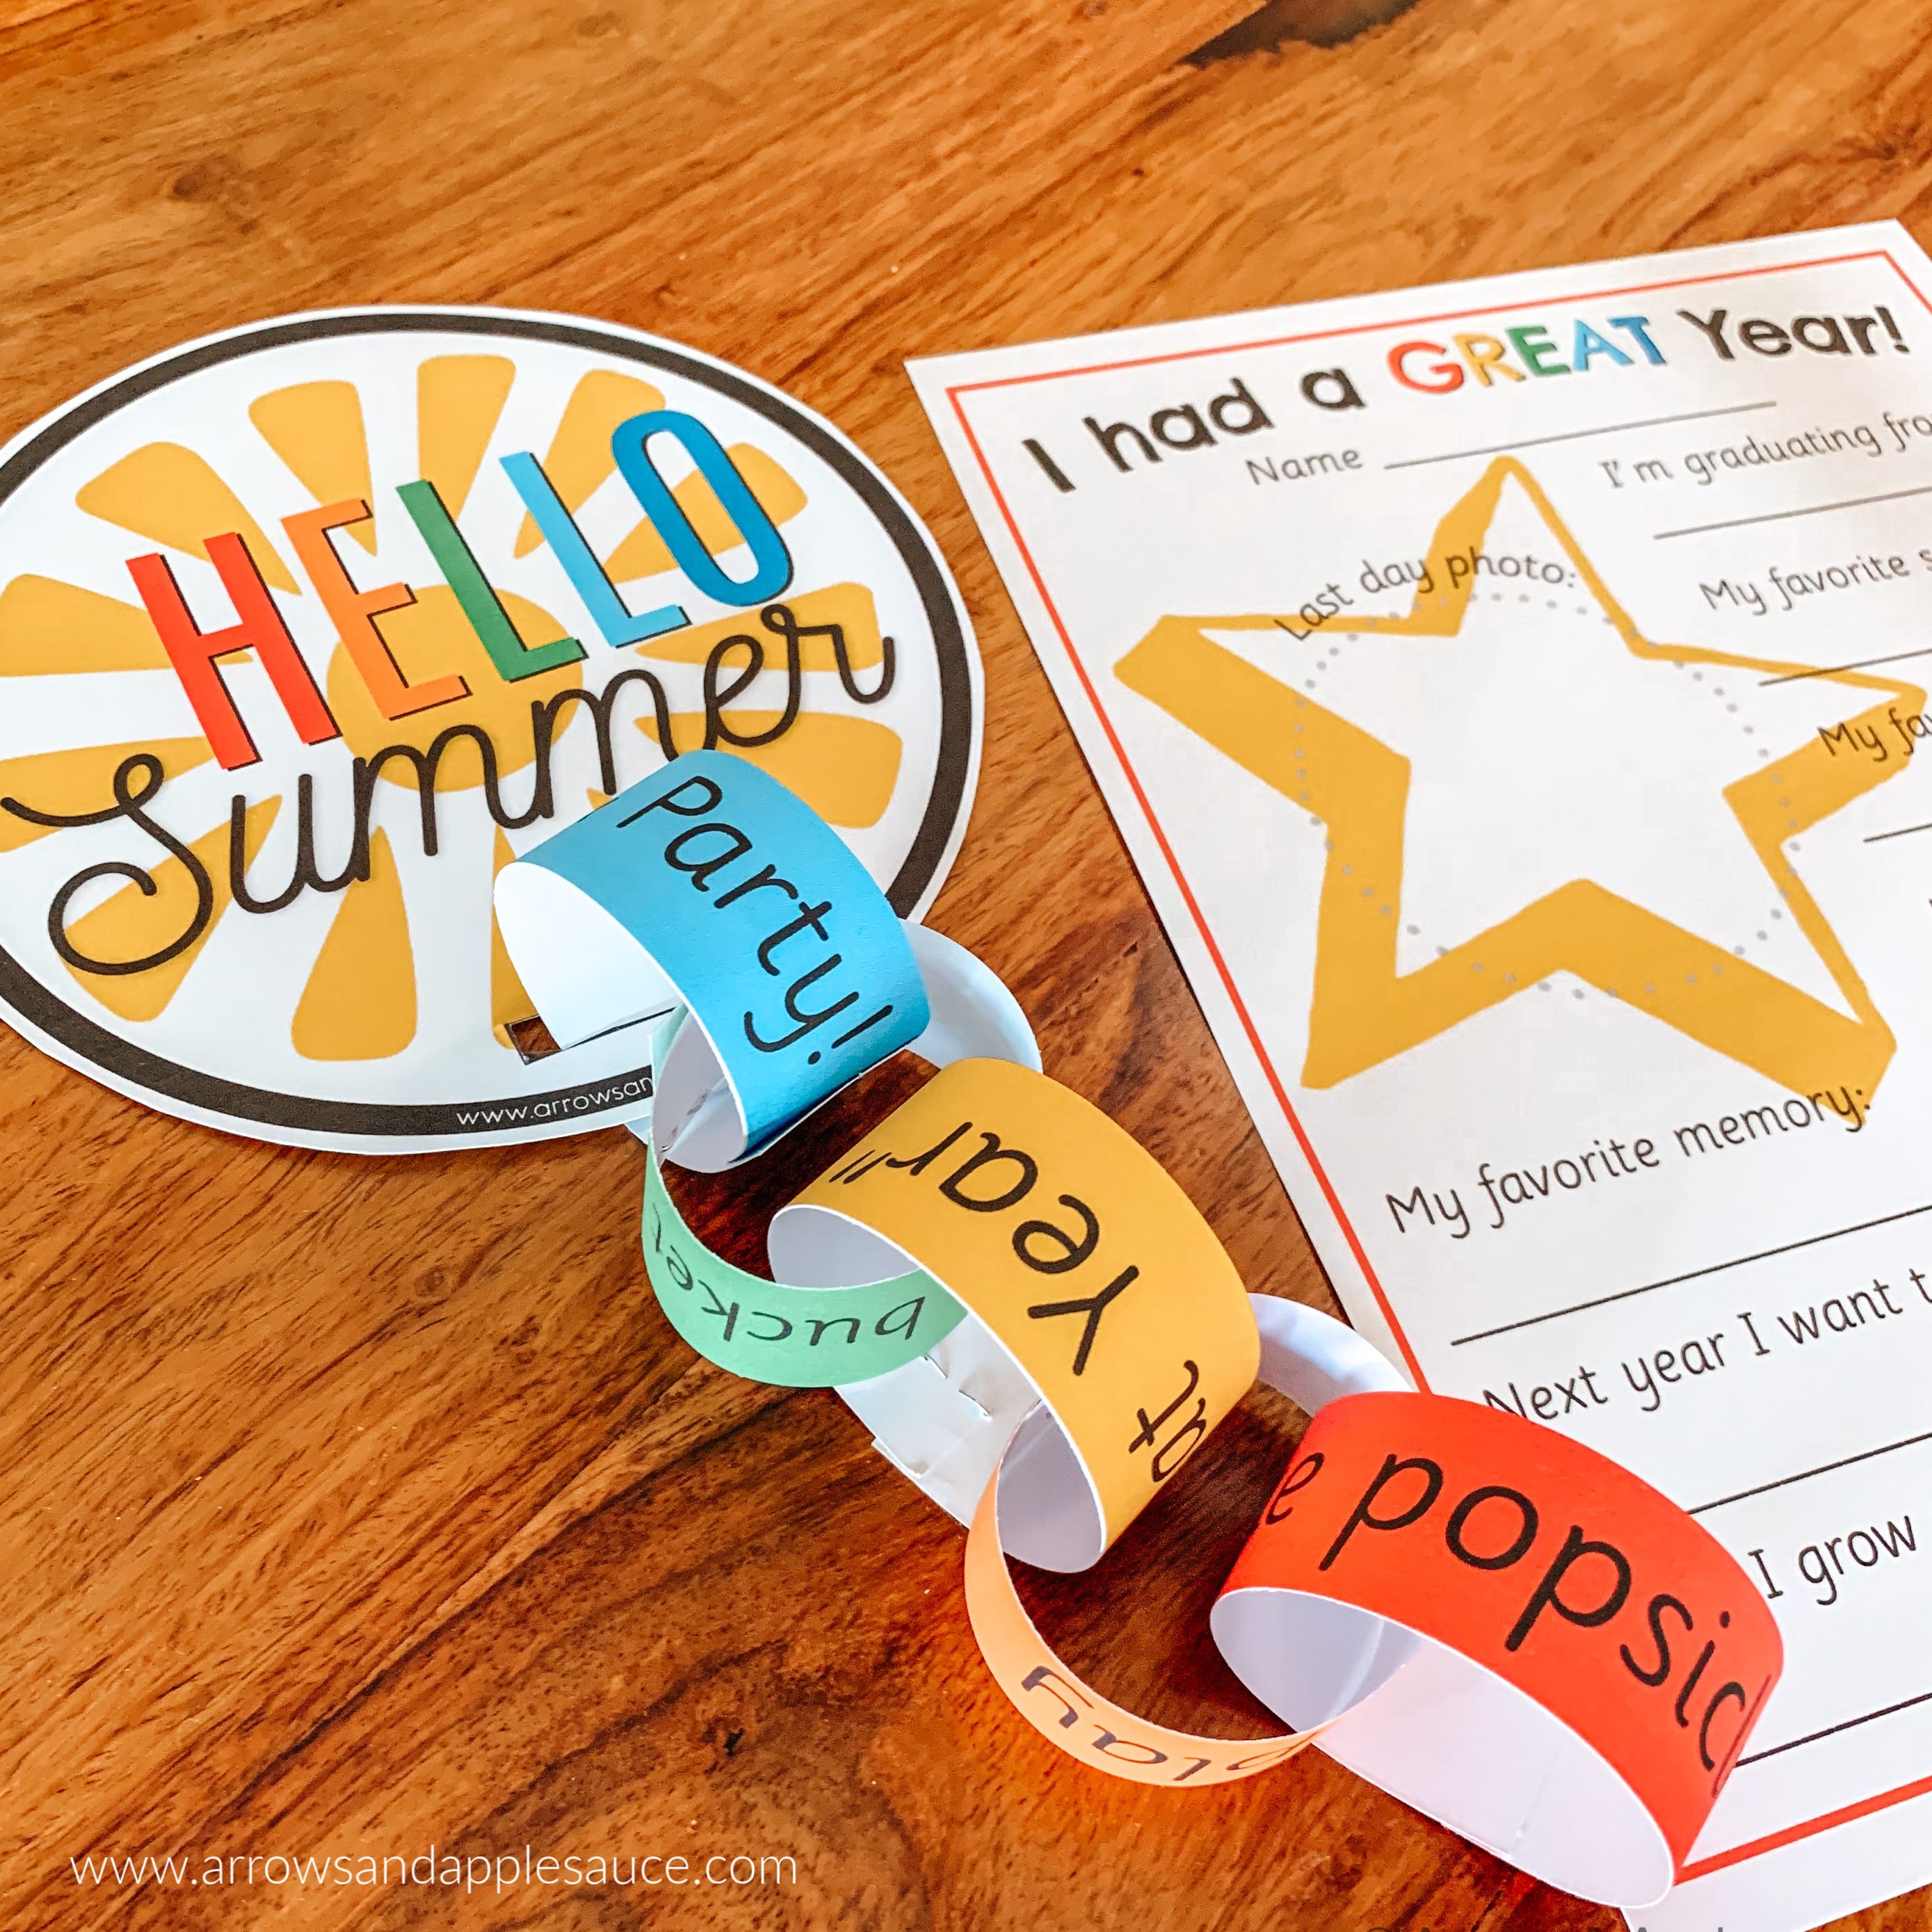 We're starting some fun traditions with this end of the school year summer countdown and interview. What a great way to start the summer and make memories! #endoftheyear #schoolsoutforsummer #homeschooltradtions #homeschoolprintables #freekidsactivities #learningathome #homeschoolpreschool #homeschoolkindergarten #countdowntosummer #countdownchain #paperchain #schoolinterview #preschoolgraduation #kindergartengraduation